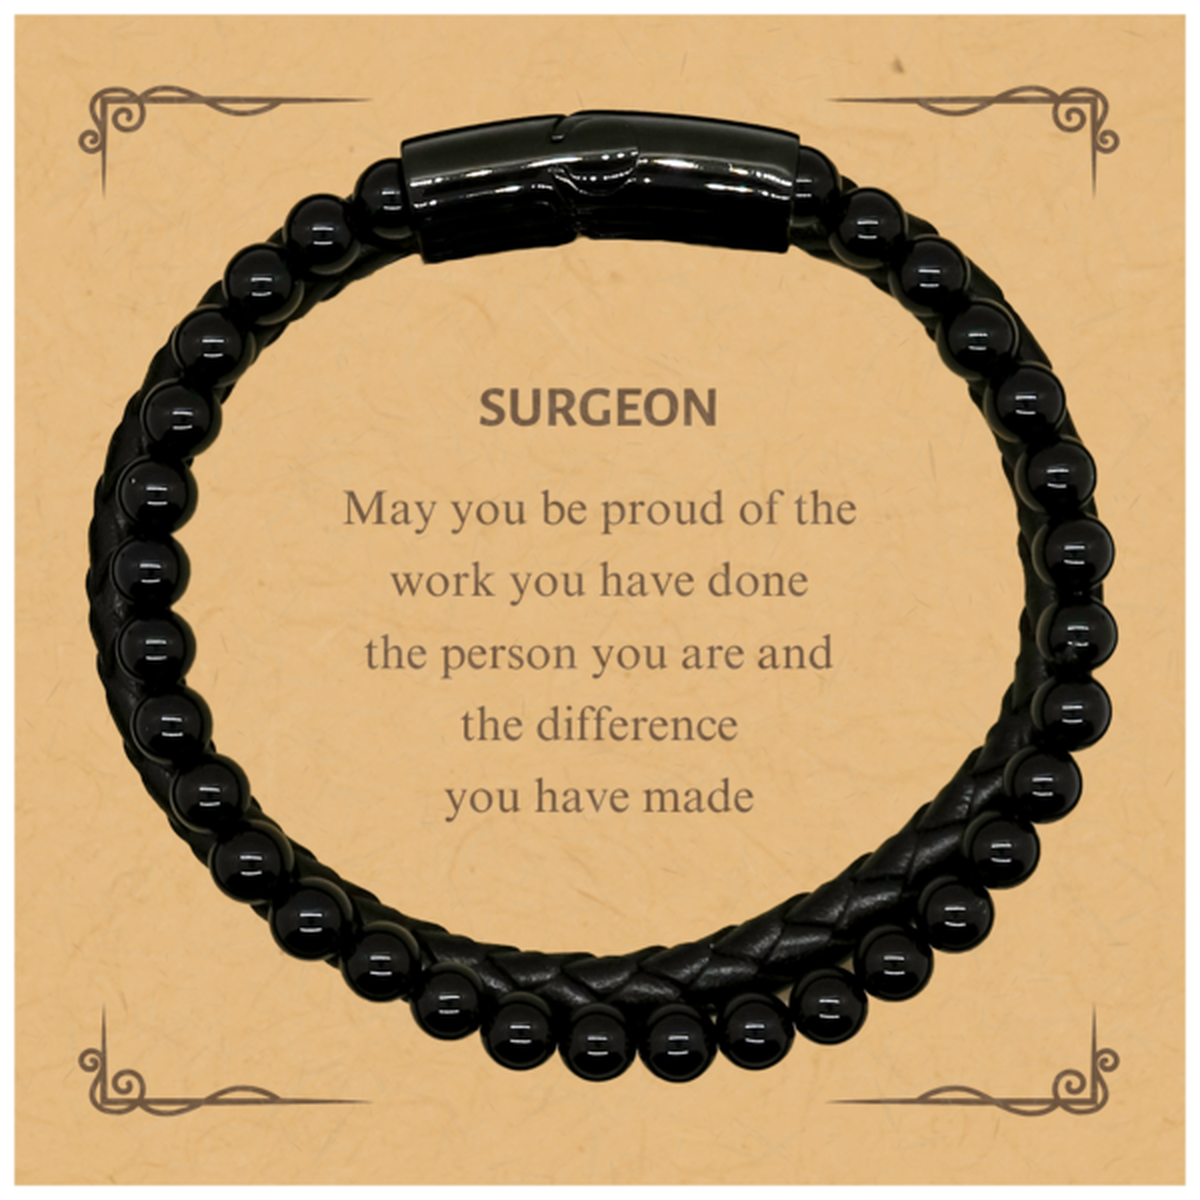 Surgeon May you be proud of the work you have done, Retirement Surgeon Stone Leather Bracelets for Colleague Appreciation Gifts Amazing for Surgeon